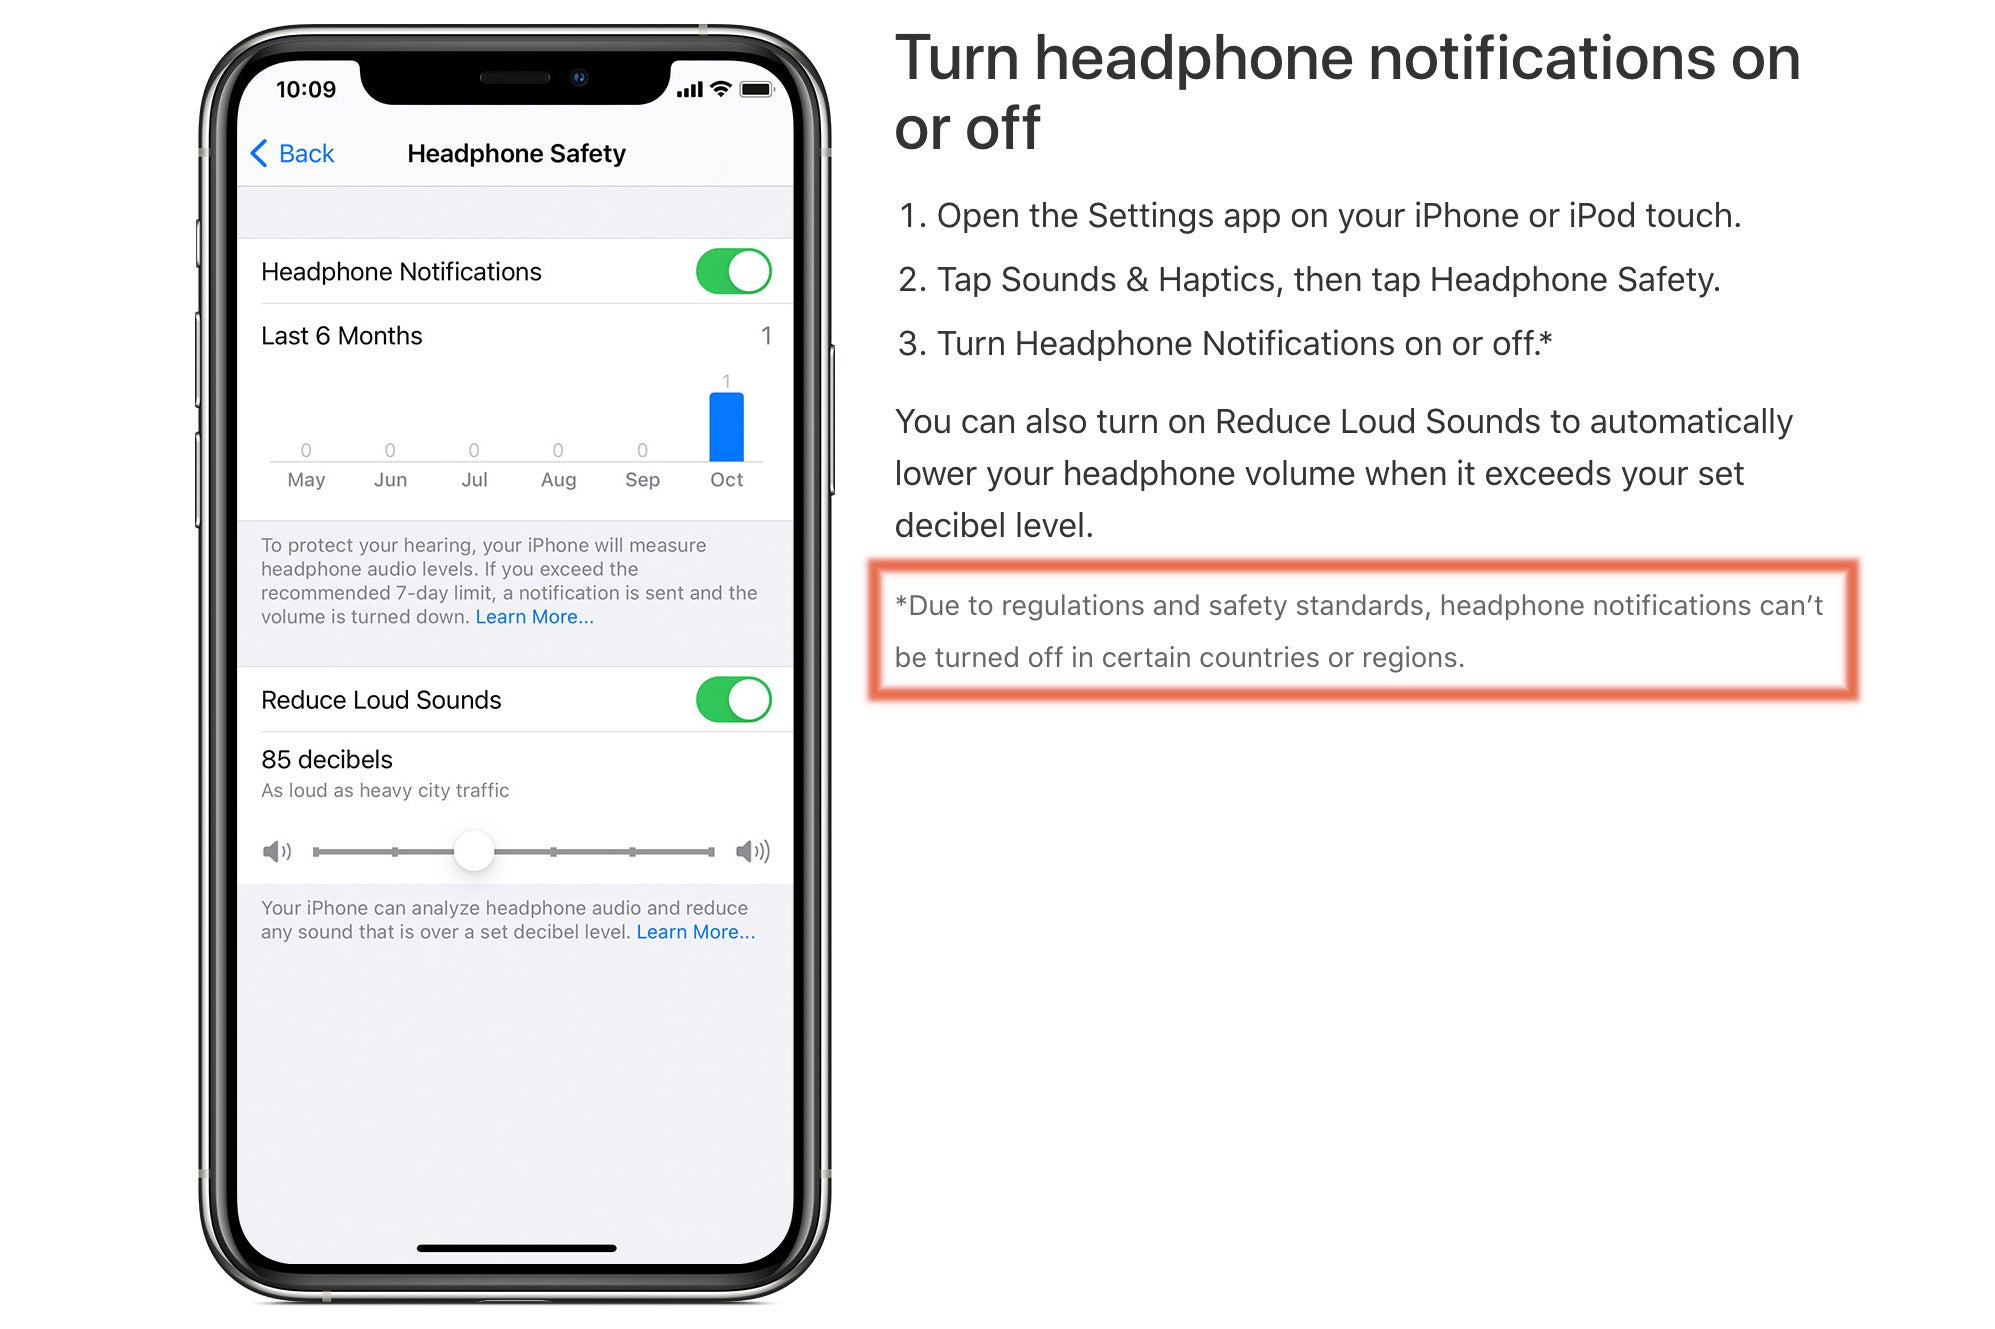 iOS 14 “Headphone Safety” reveals Apple still doesn’t care about customer choice